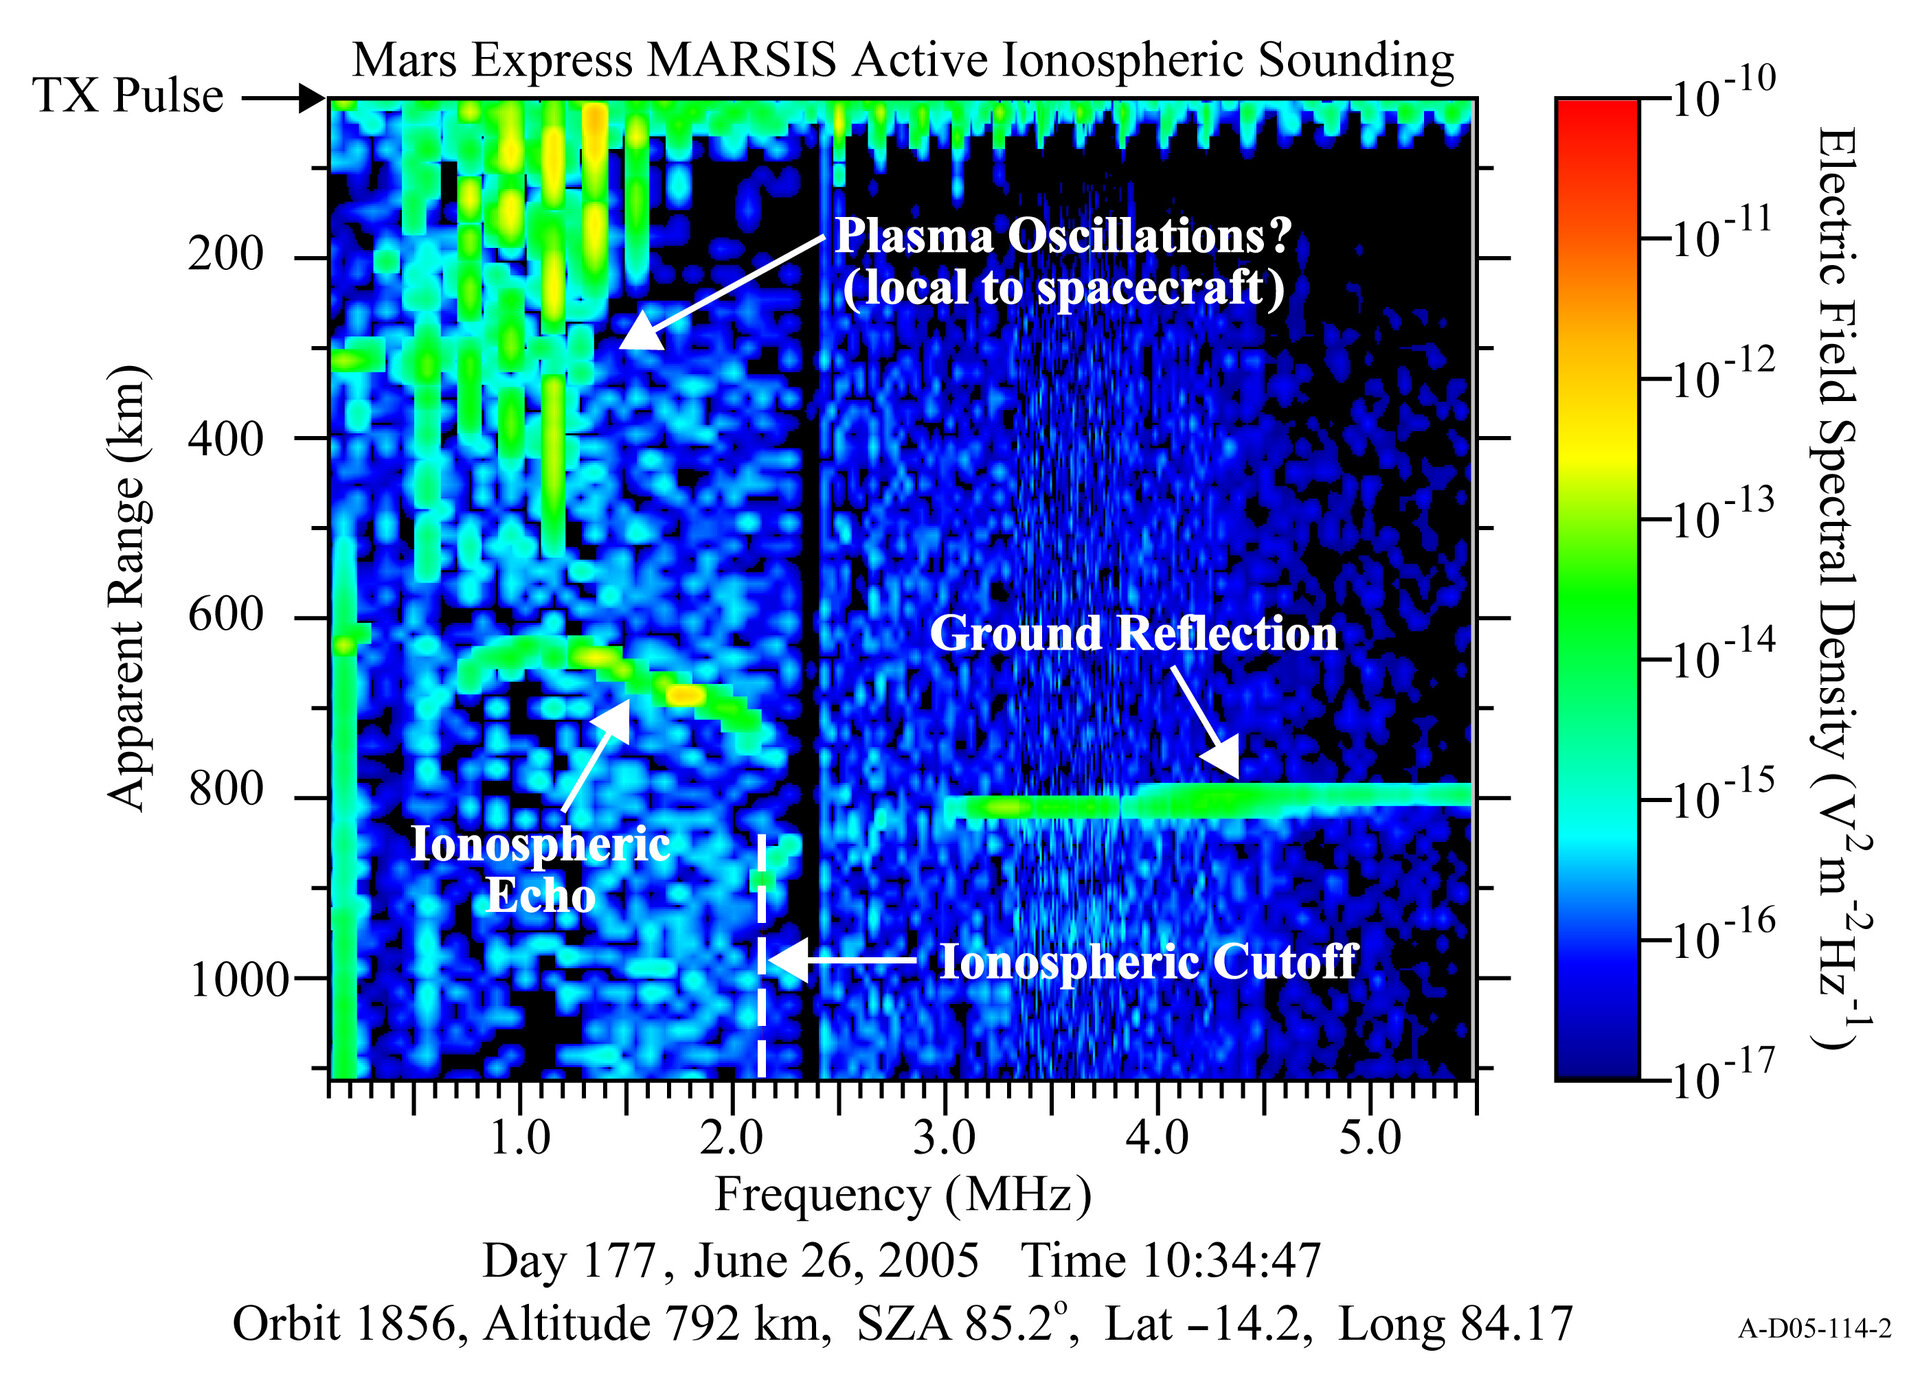 An ‘ionogram’, a typical product of MARSIS ionospheric sounding